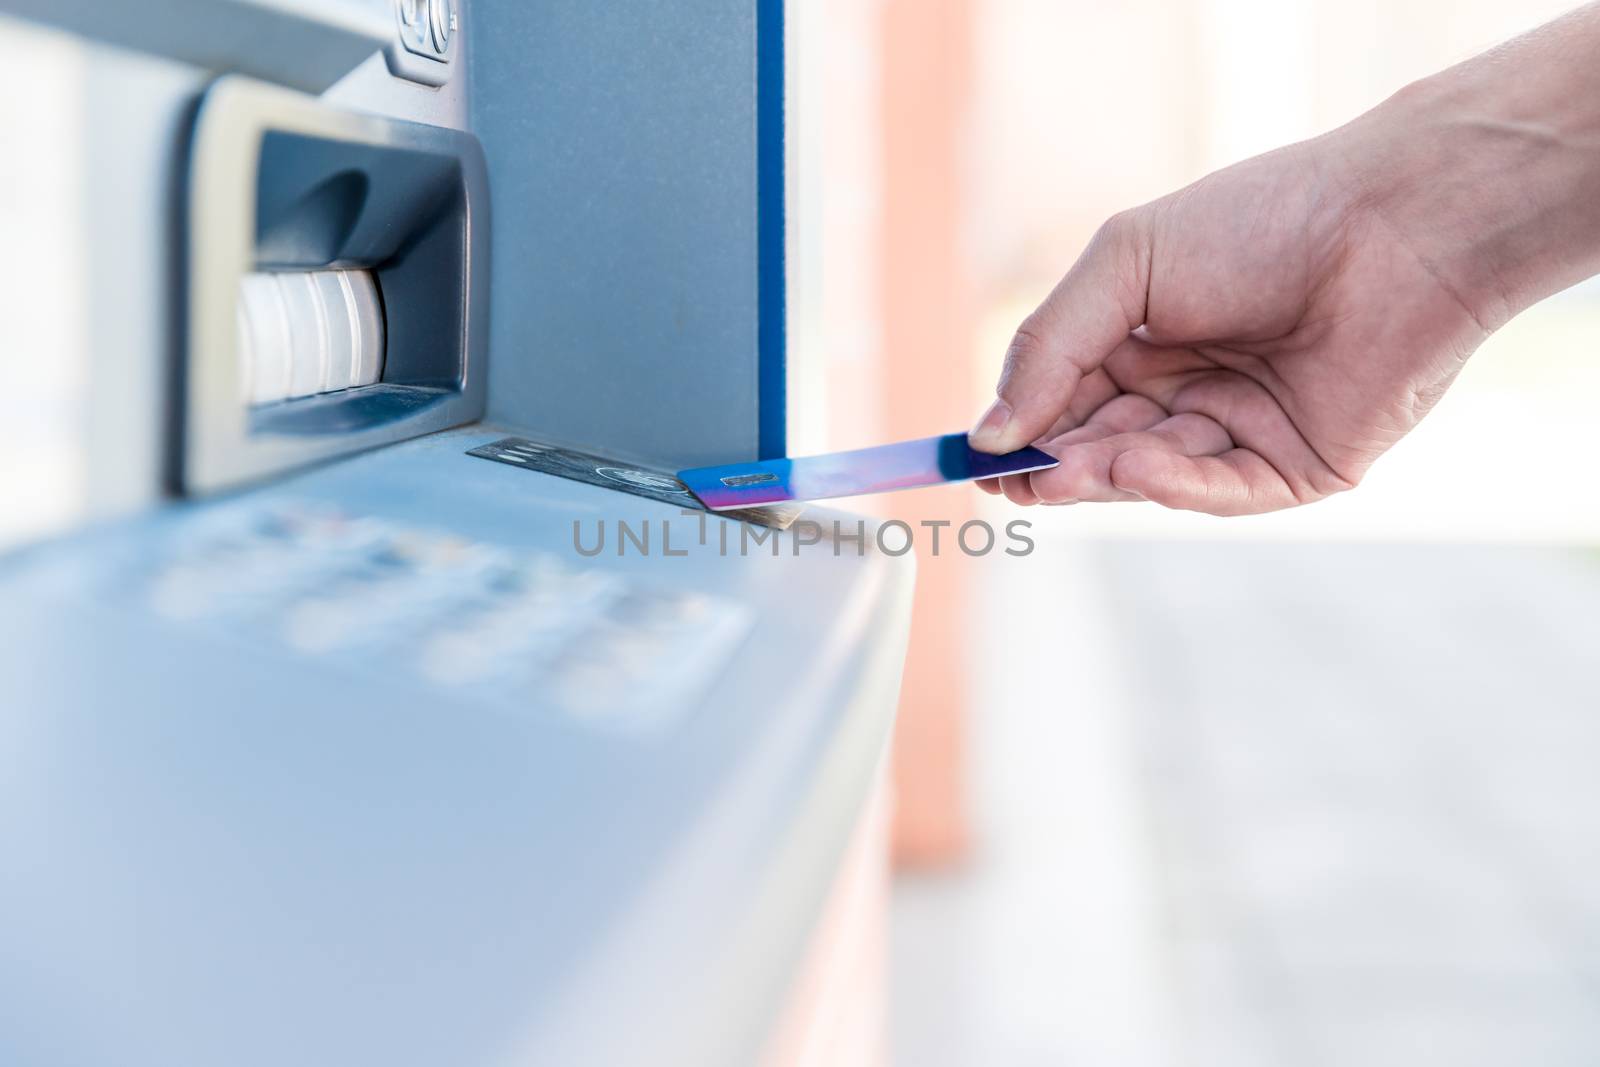 Wireless withdrawal from an ATM by credit card.